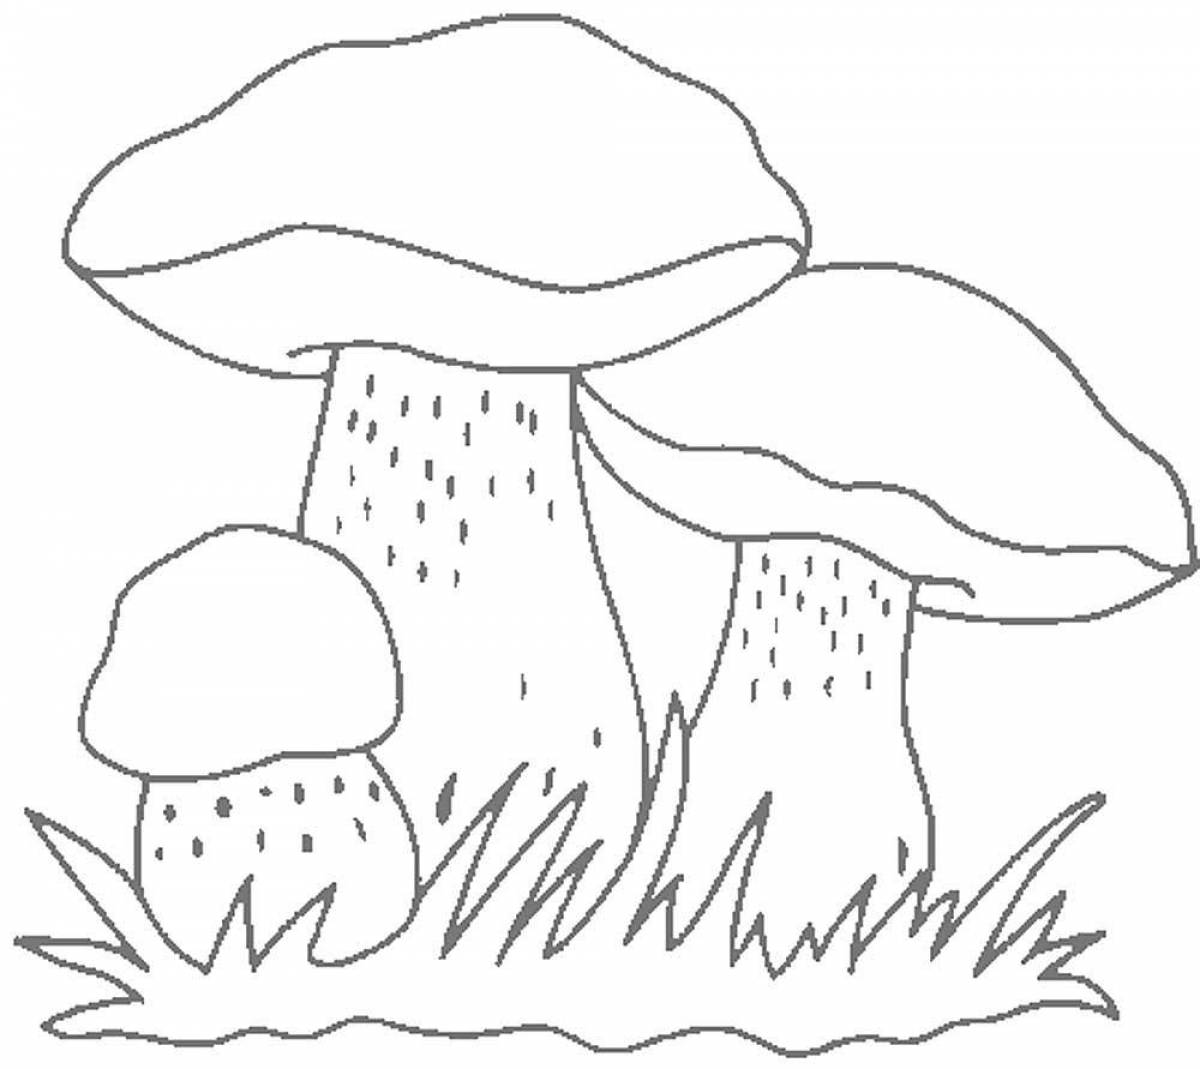 Colorful mushroom coloring page